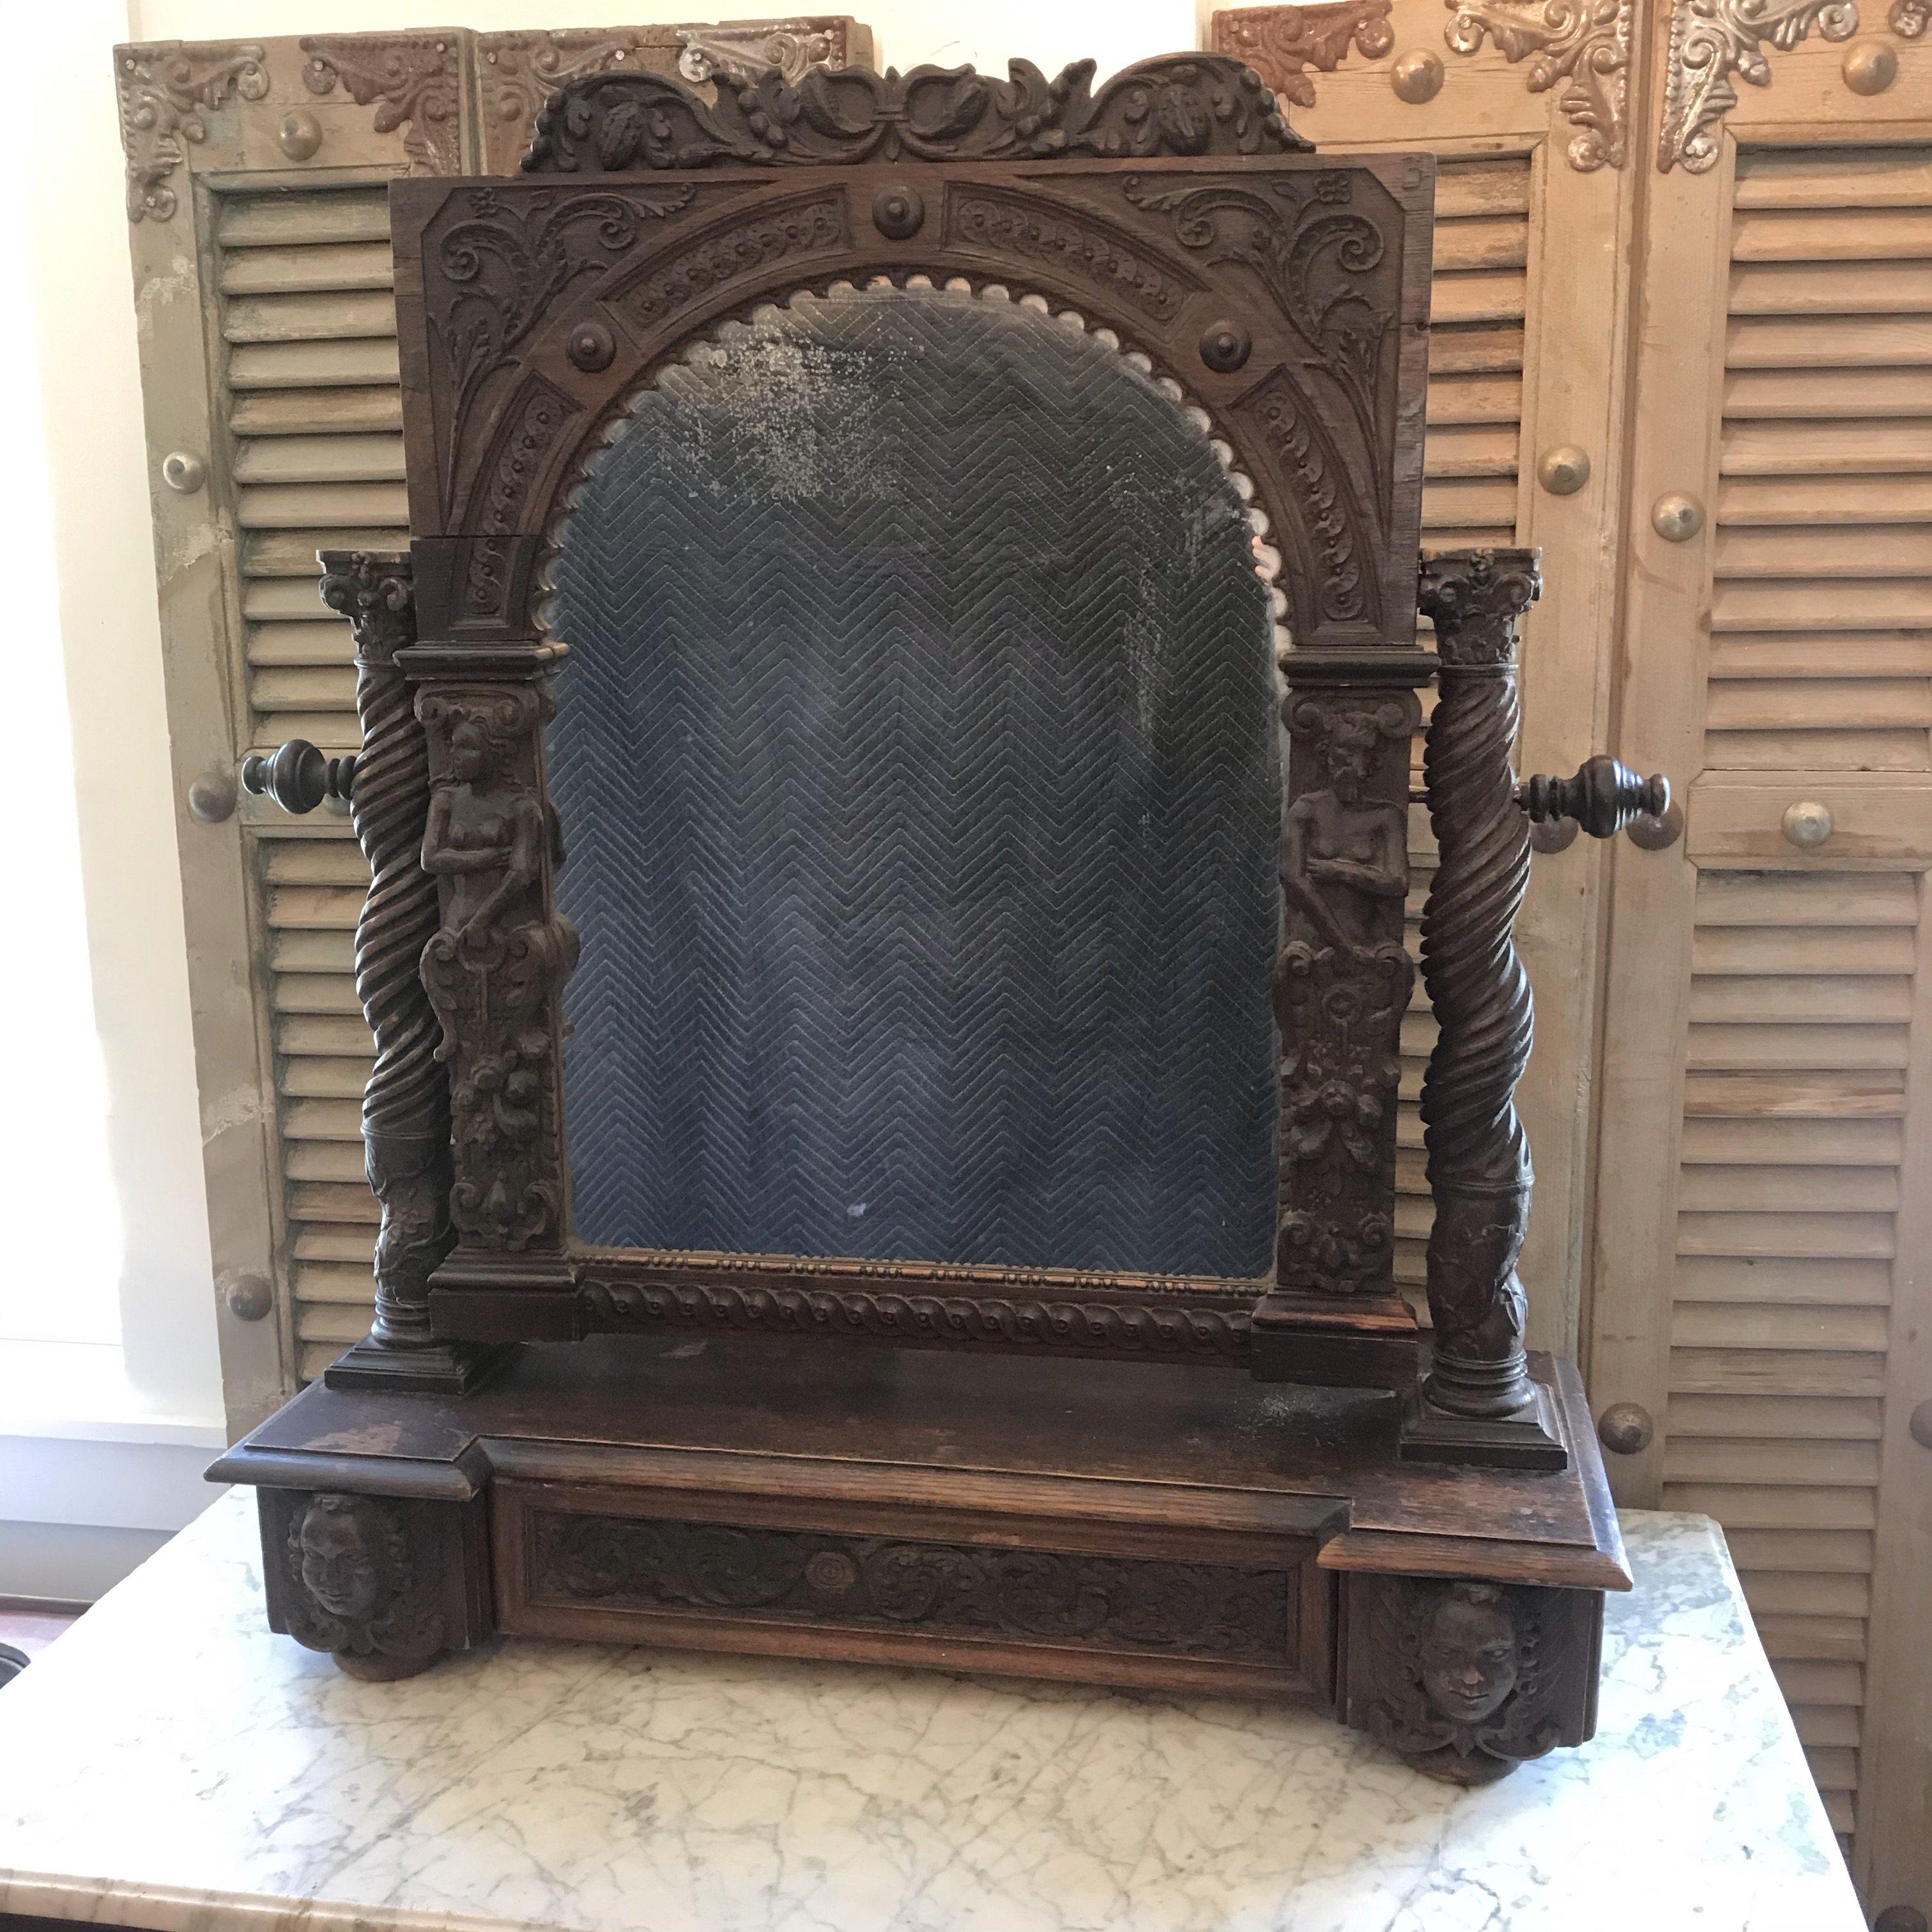 An amazing carved dark oak tabletop mirror having incredible craftsmanship and sculptural qualities with figures, faces, and ornate carved decoration everywhere, as well as a single drawer at the bottom. A true work of art. #5274